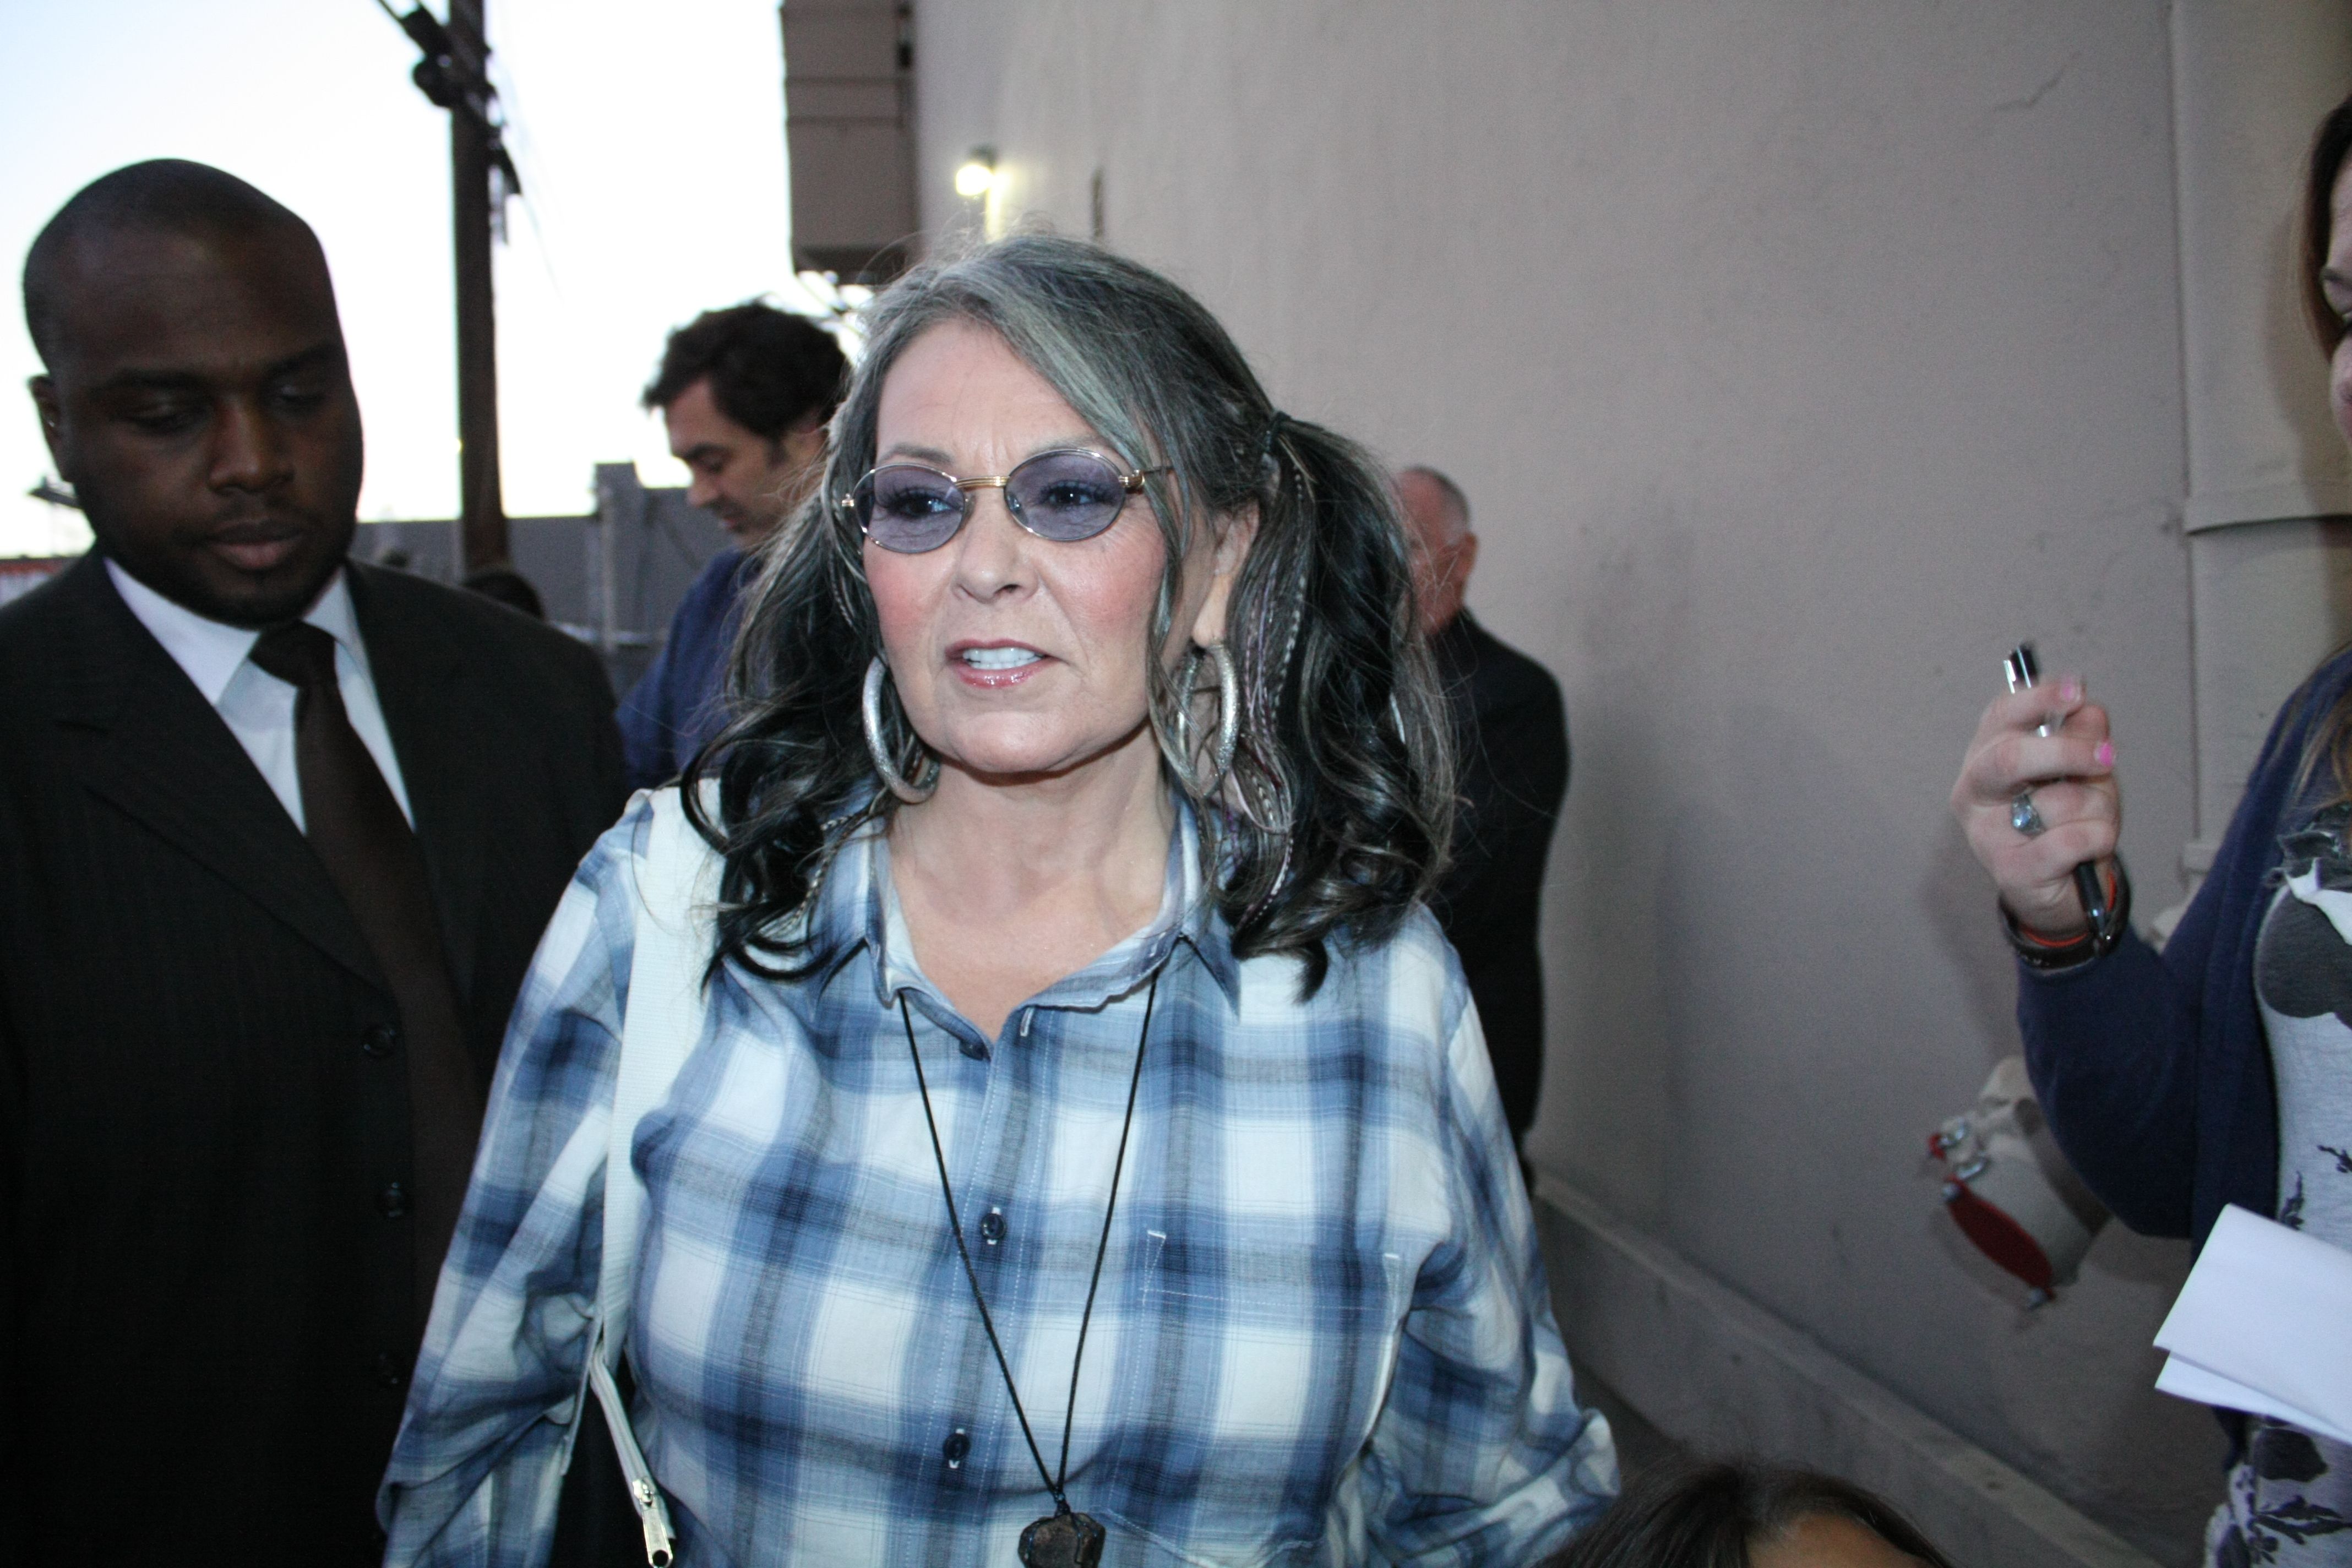 Roseanne Barr wears pigtails and plaid shirt during public outing. 